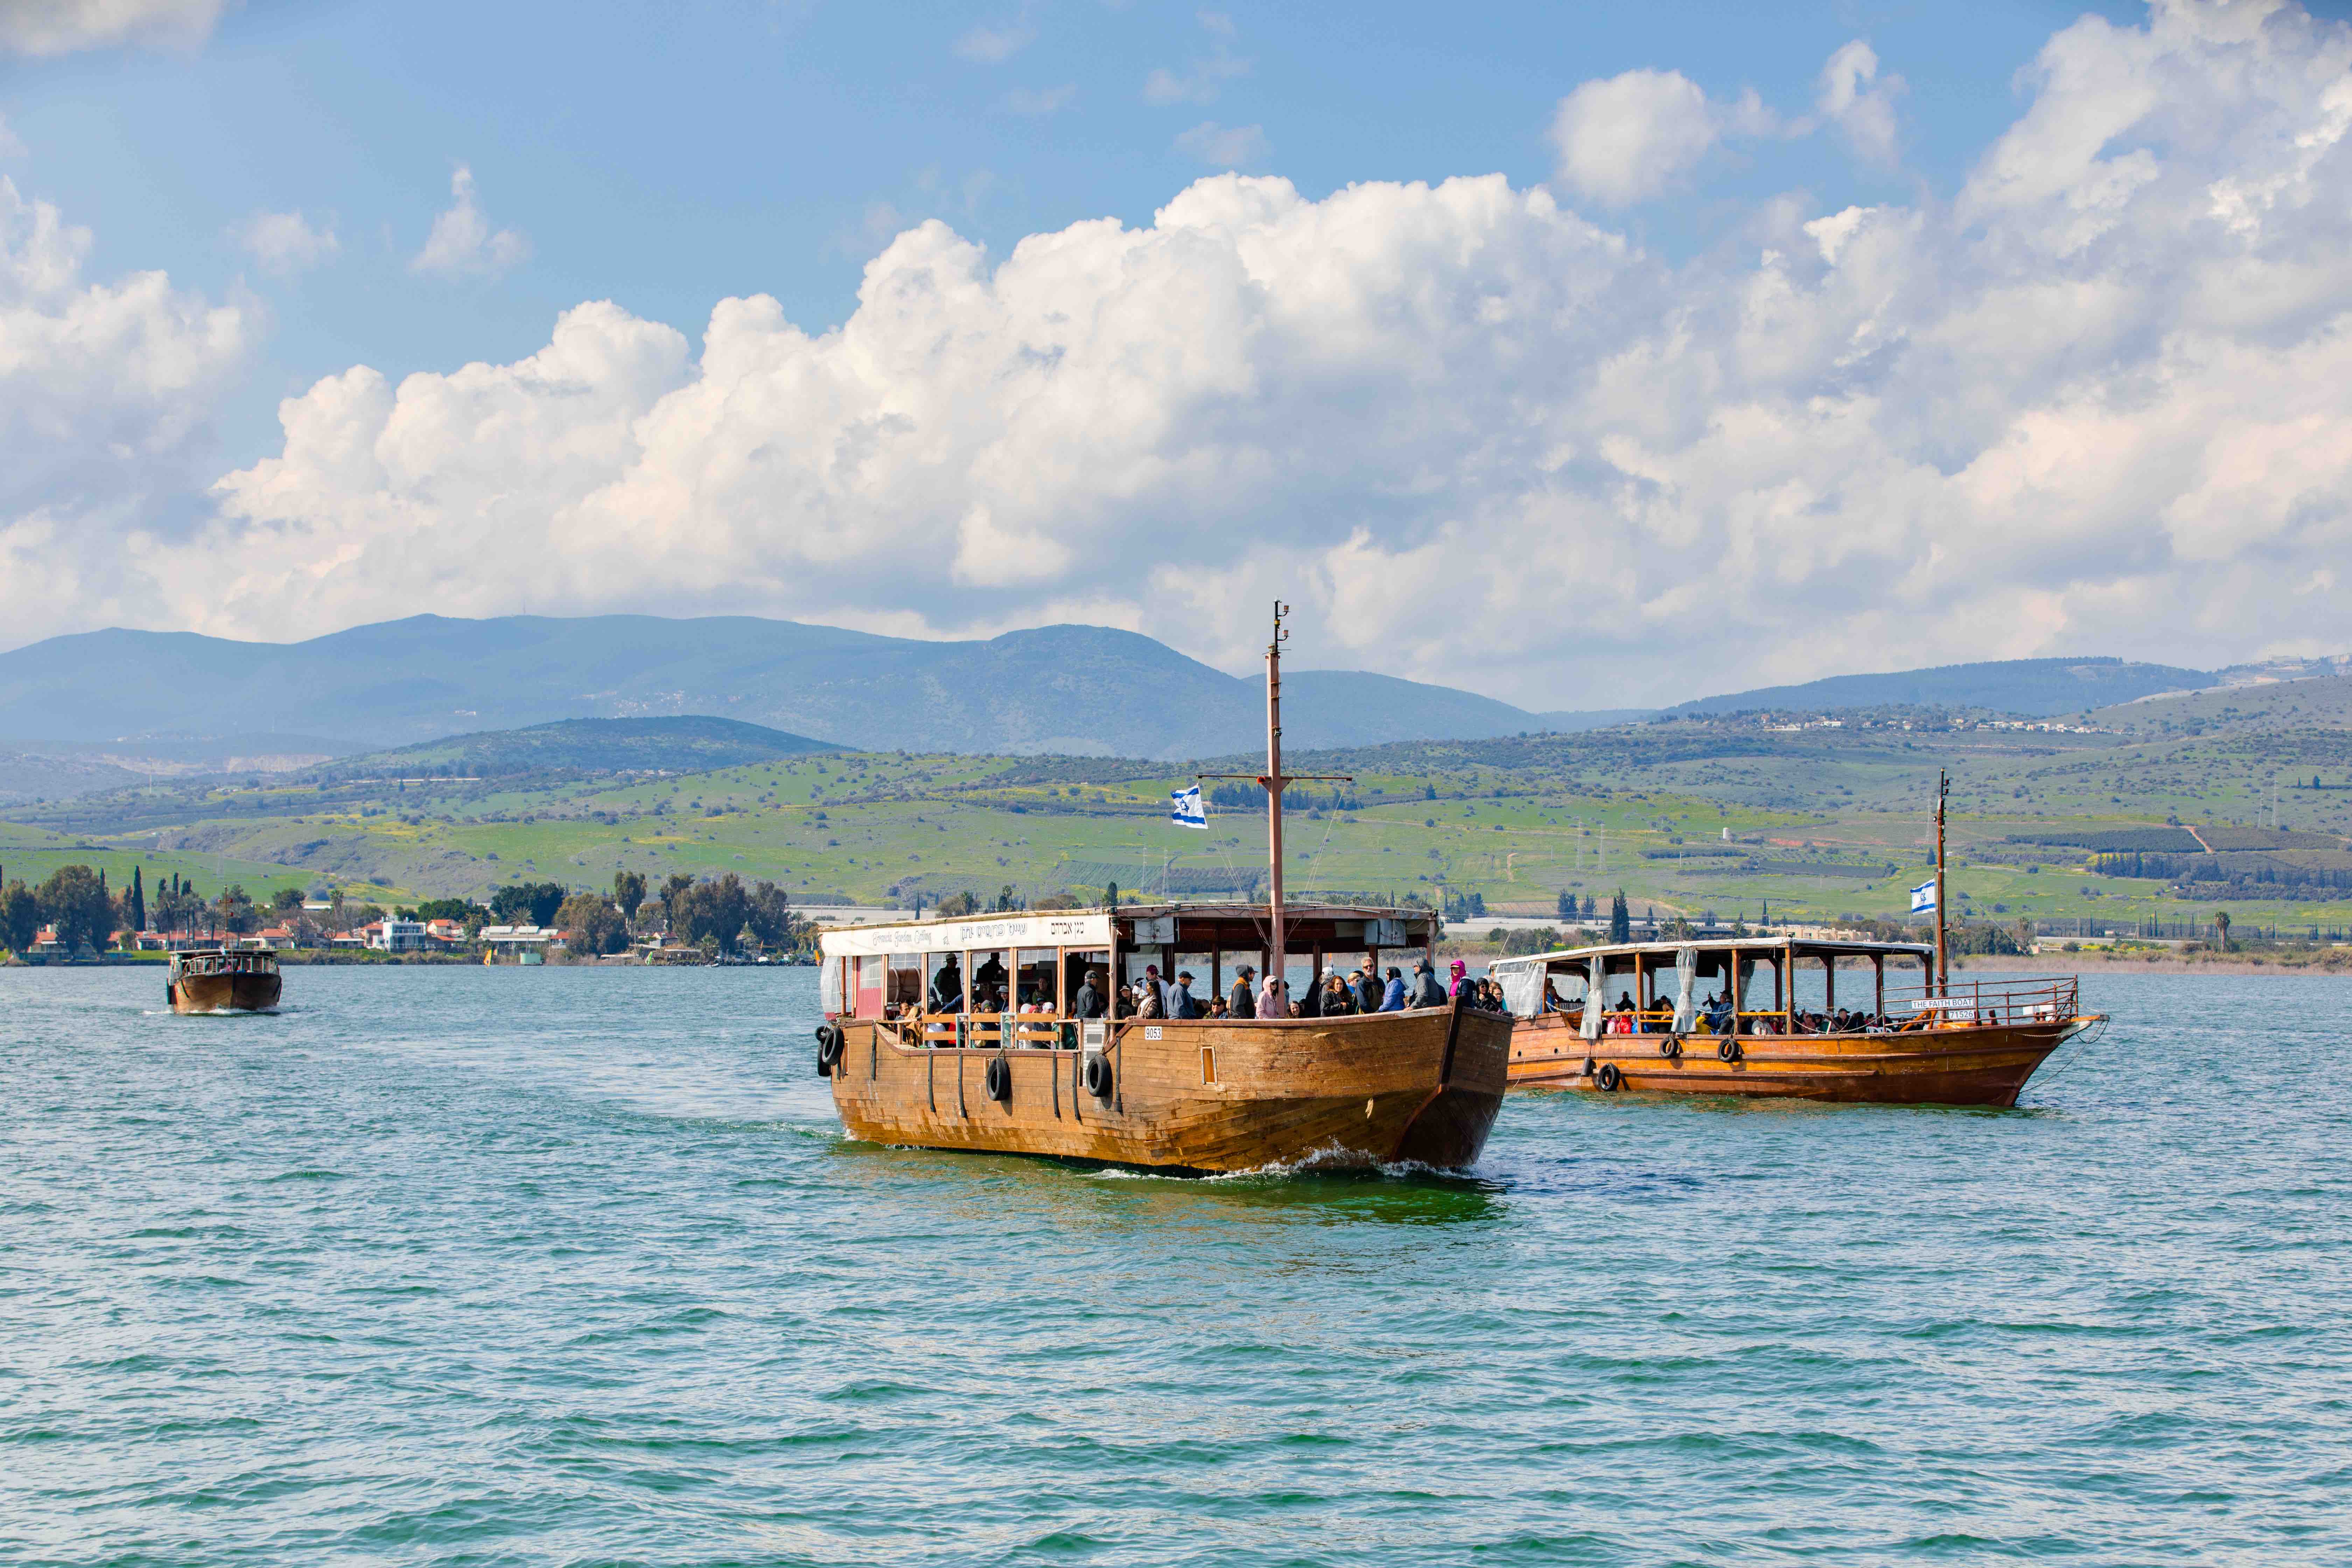 Boats on the clear blue waters of the Sea of Galilee